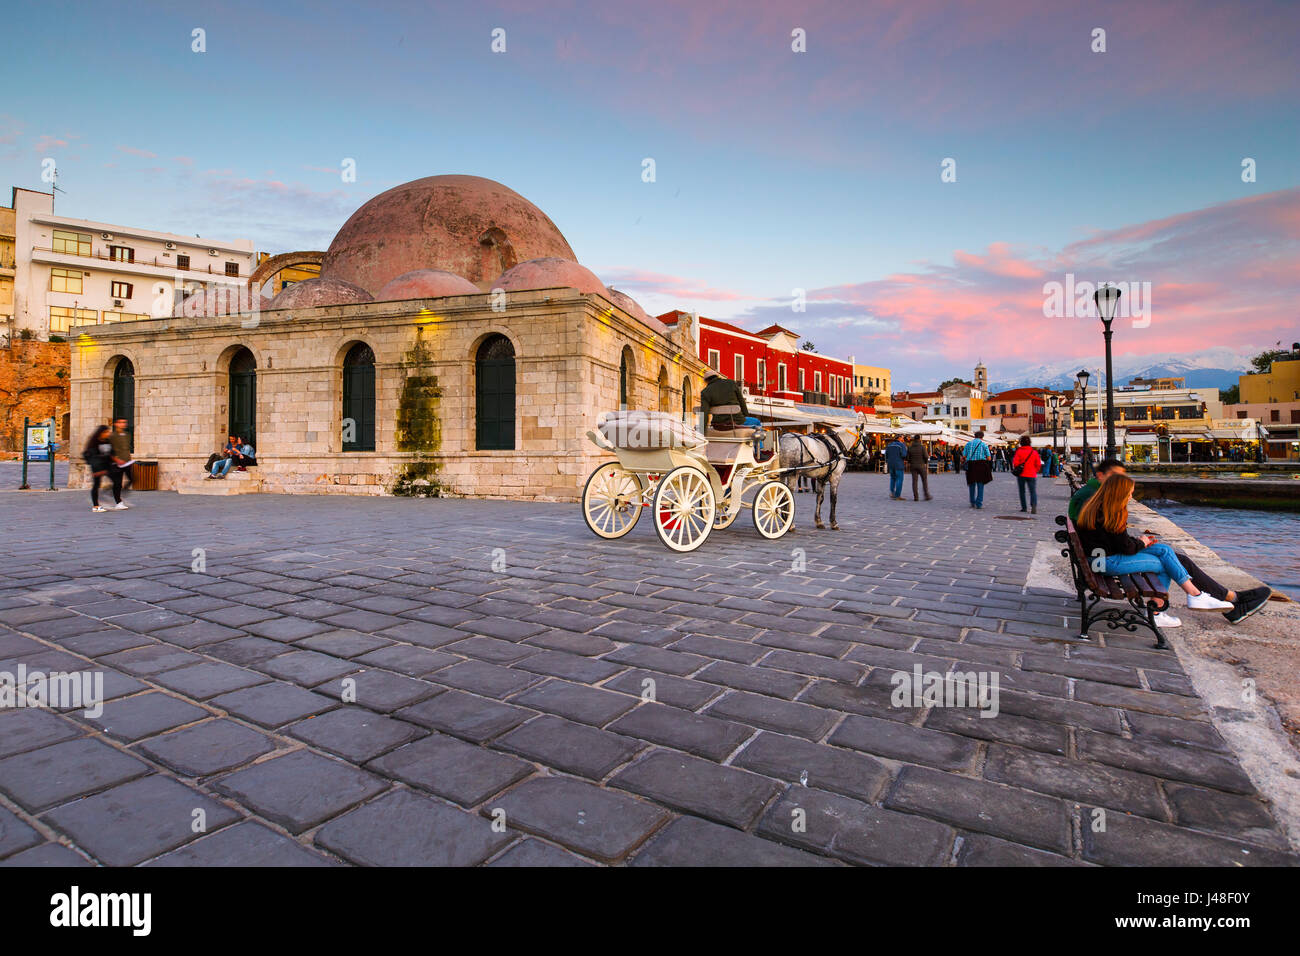 Evening view of the old town of Chania in Crete, Greece. Stock Photo